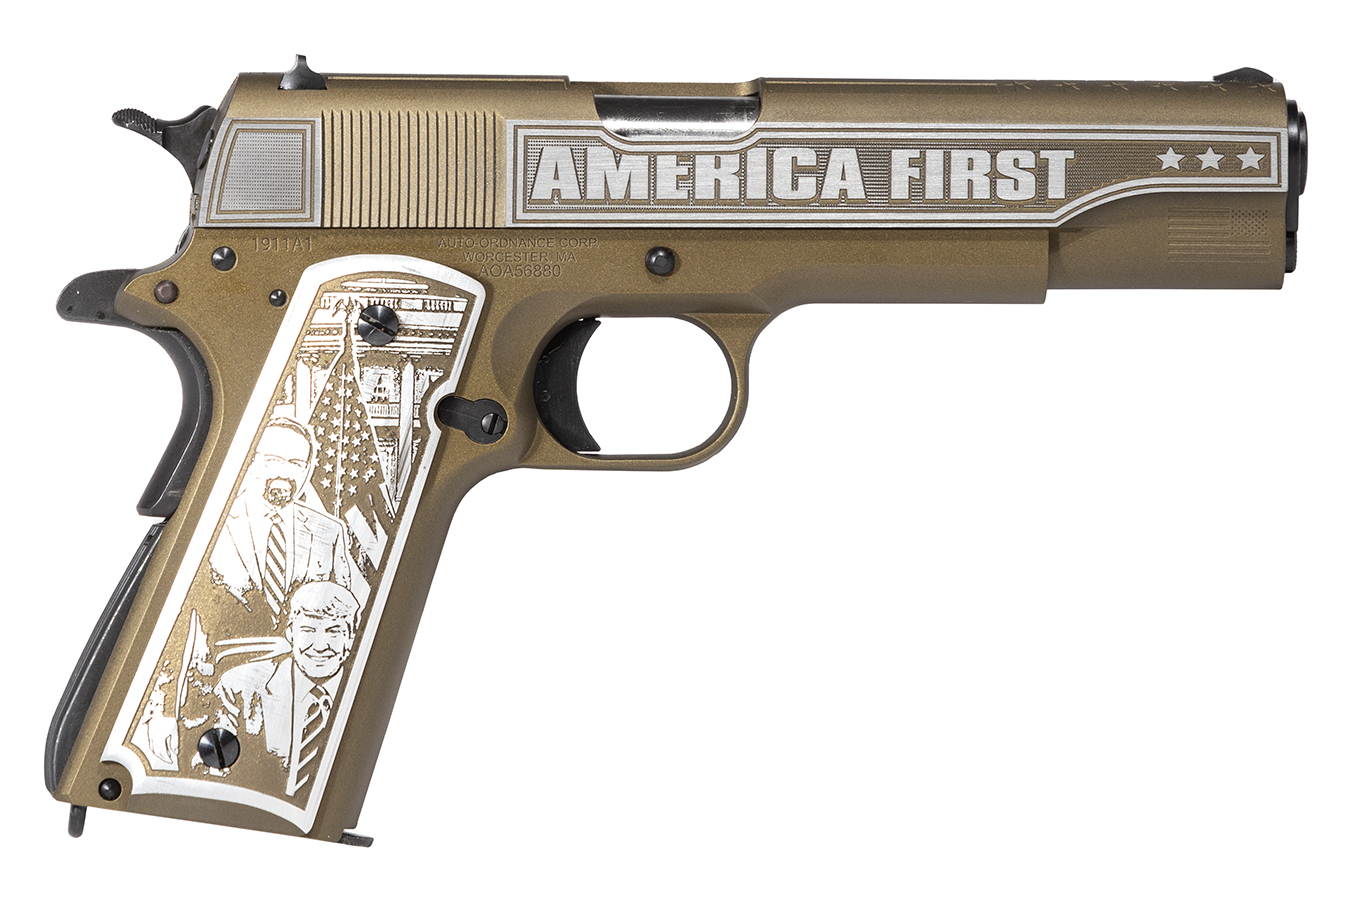 No. 38 Best Selling: AUTO ORDNANCE 1911A1 45 ACP FULL-SIZE PISTOL WITH CUSTOM AMERICA FIRST ENGRAVING